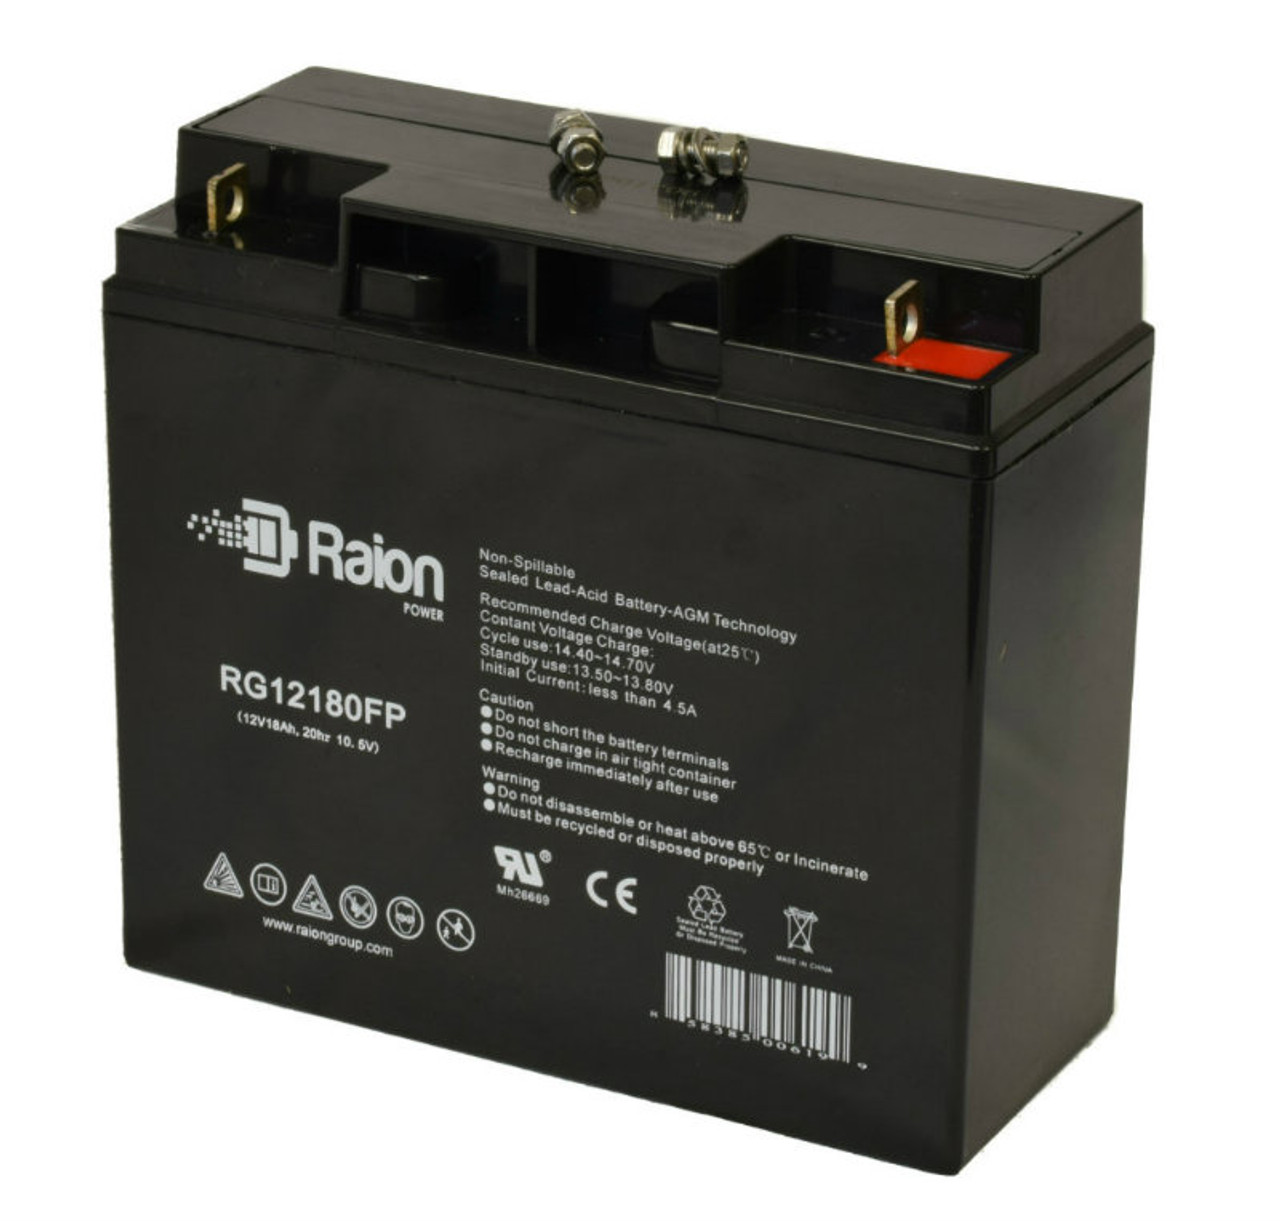 Raion Power Replacement RG12180FP Fire Alarm Control Panel Battery for ADT Security Alarm 4520615